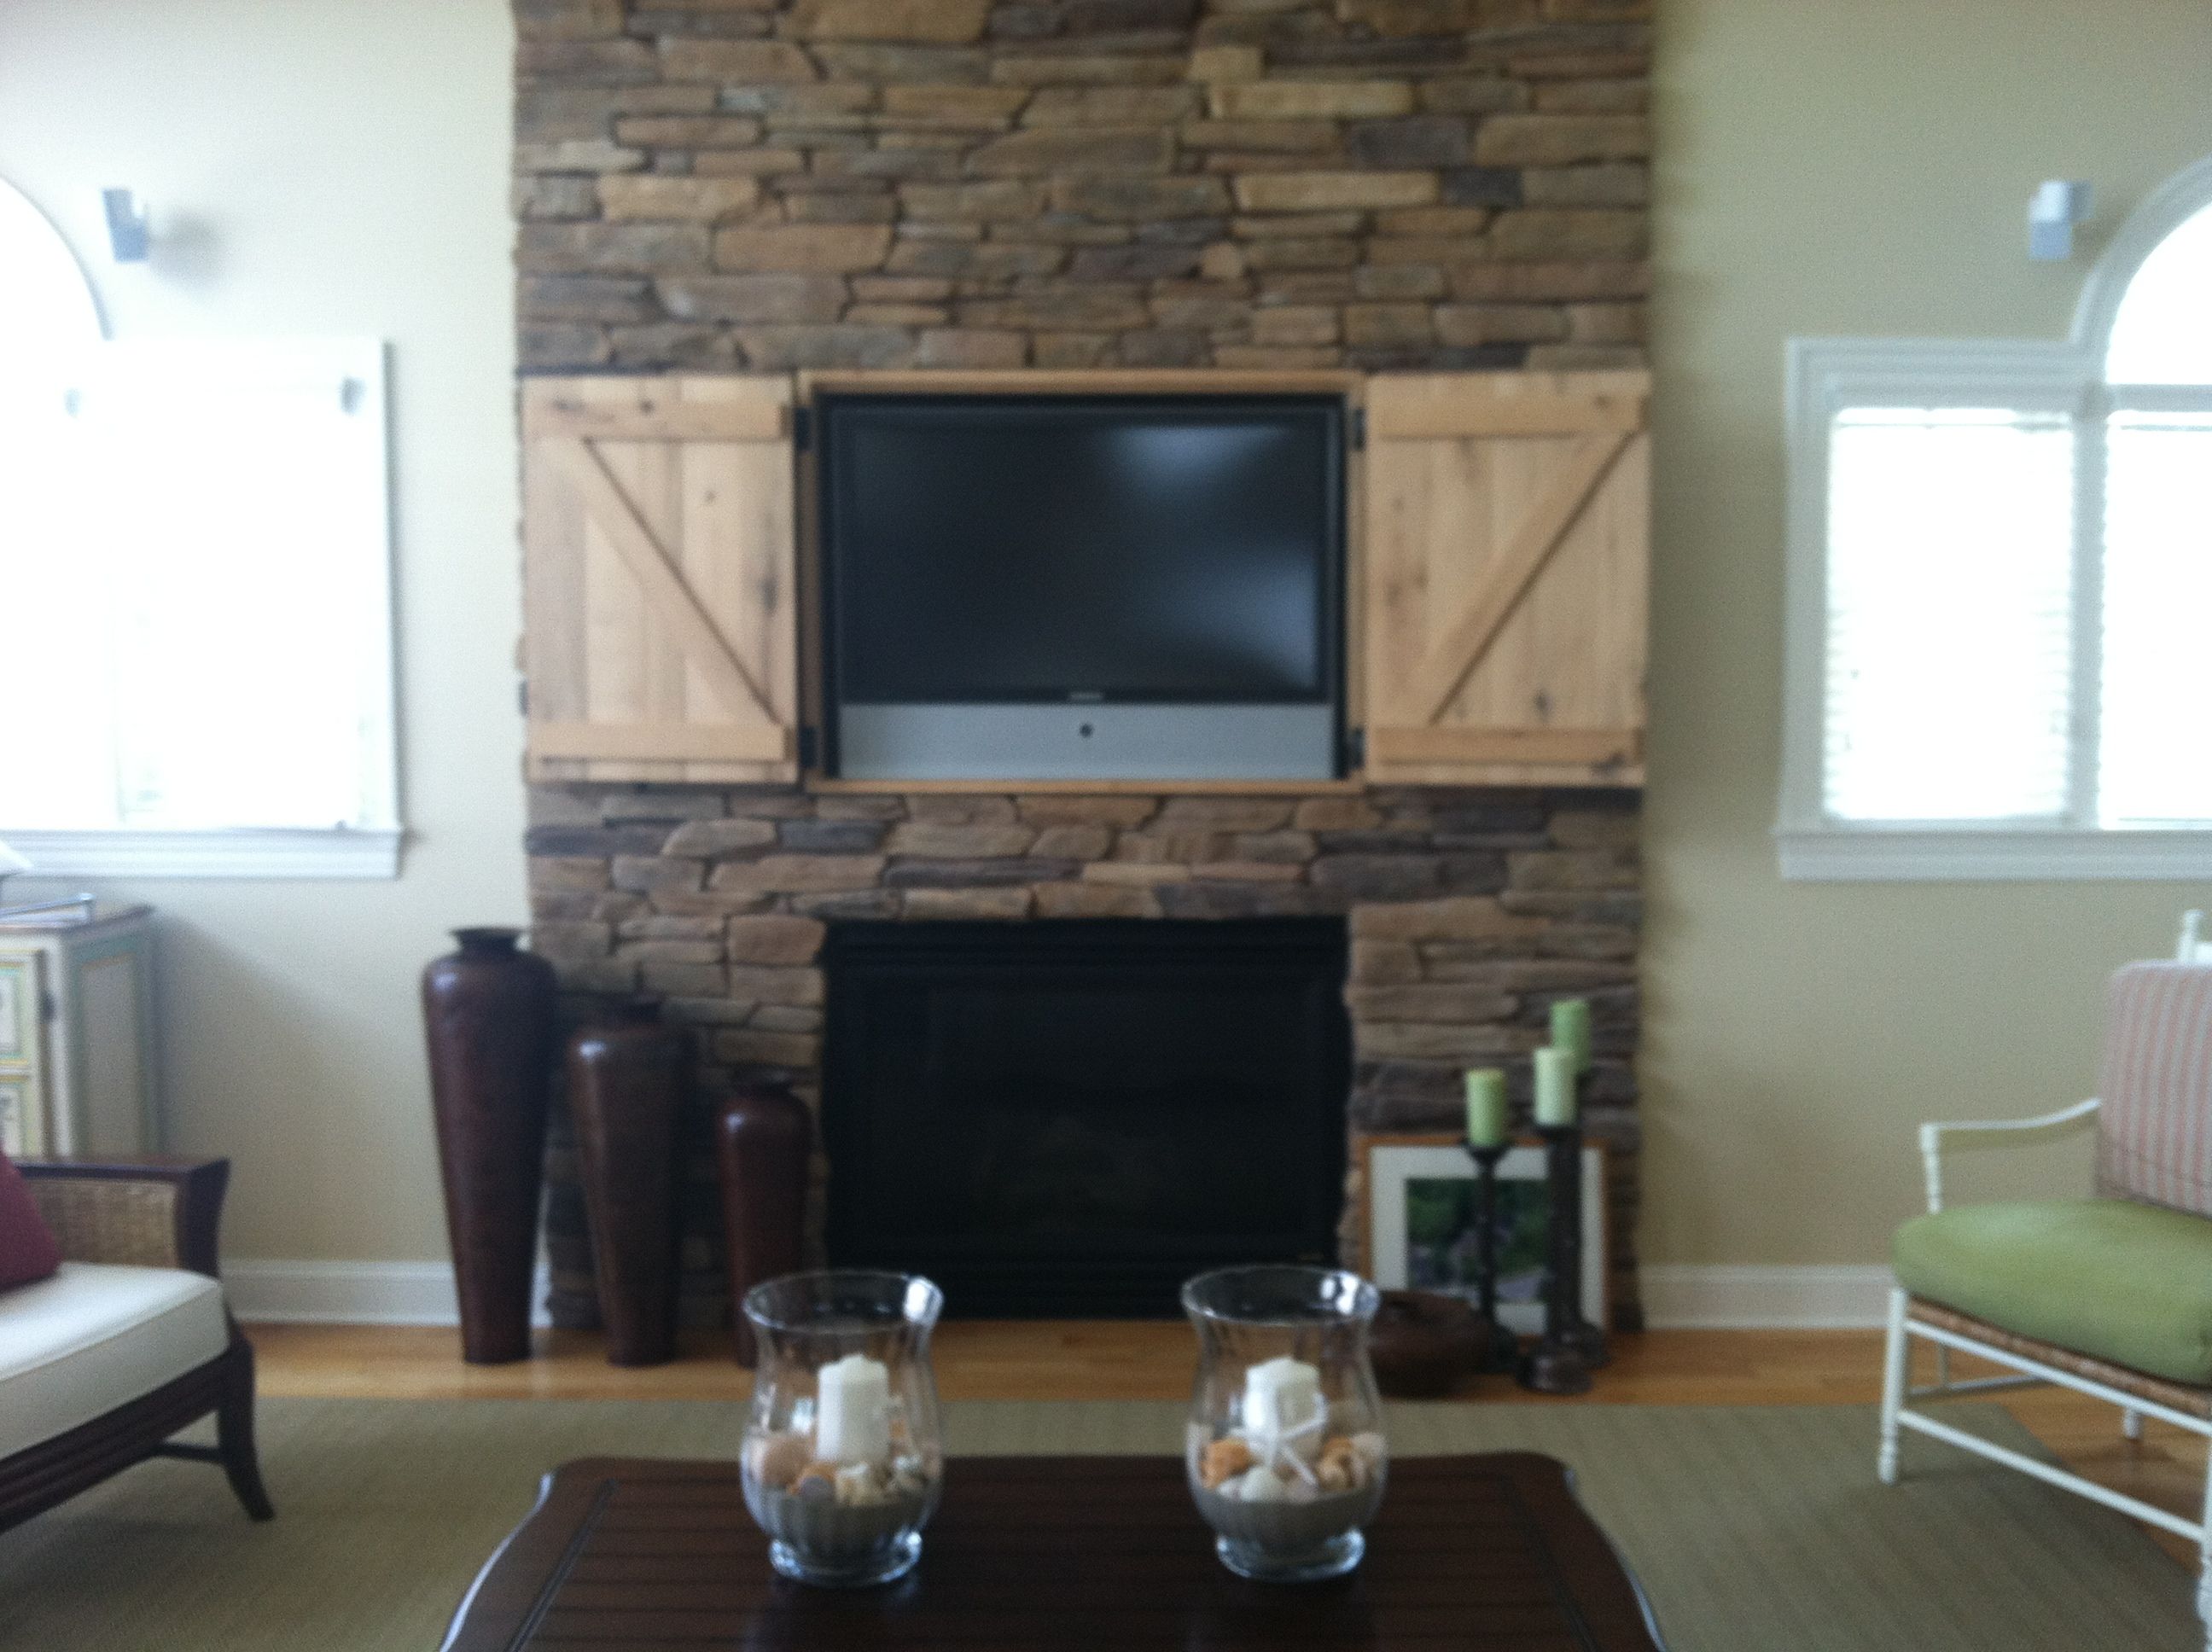 Lighting Above Fireplace Awesome Hidden Tv Over Fireplace Open Doors Decor and Design